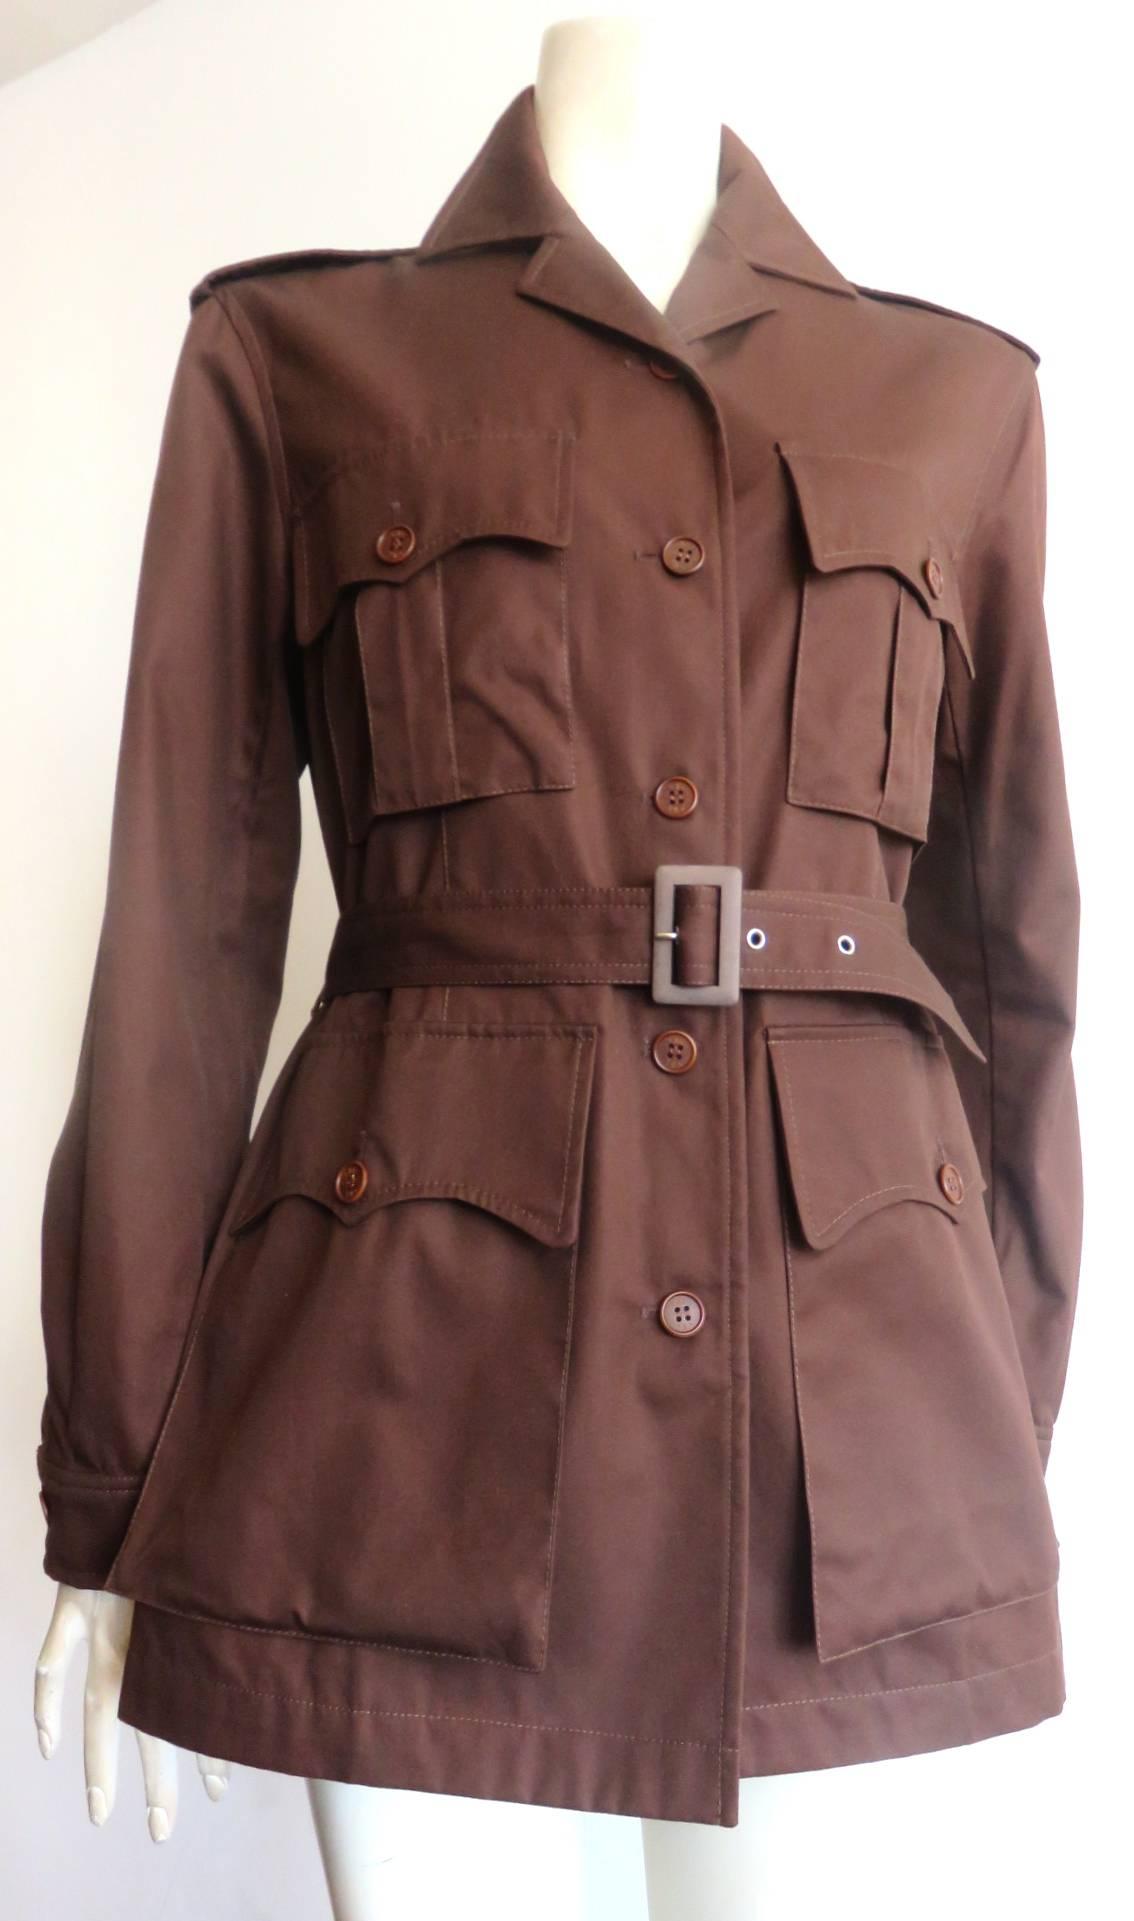 Excellent condition, 1998, YVES SAINT LAURENT Encore, cocoa-brown, coton twill, safari jacket.

Shaped pocket flaps with logo engraved button down closures at chest and waist.

Wide, button-down shoulder epaulet detailing.

Adjustable belted